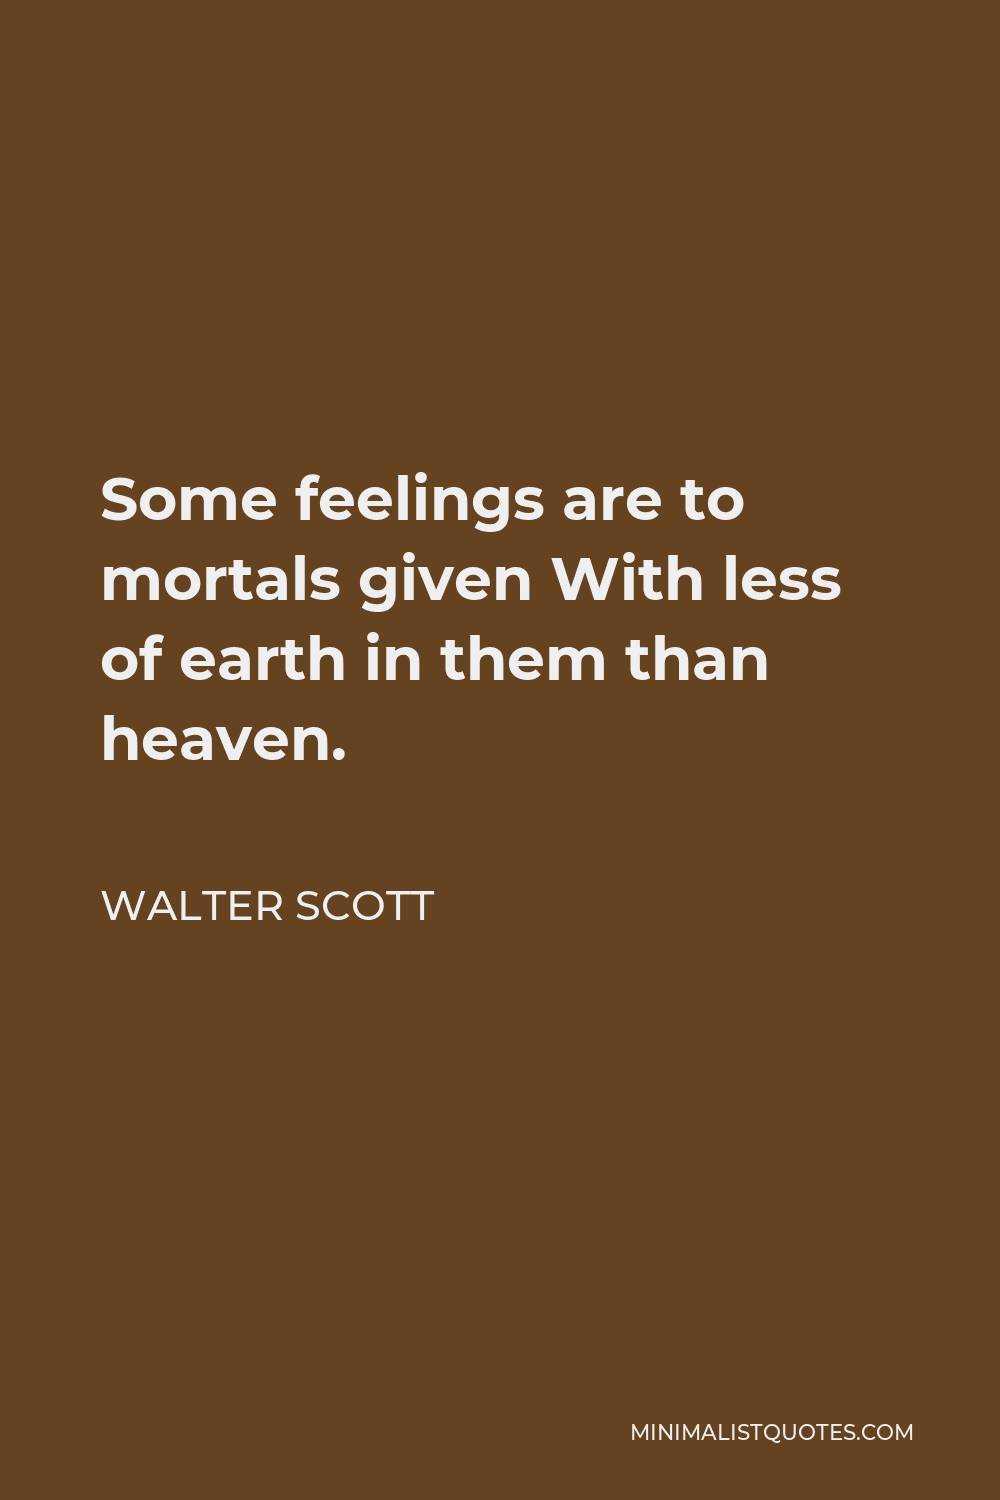 Walter Scott Quote - Some feelings are to mortals given With less of earth in them than heaven.